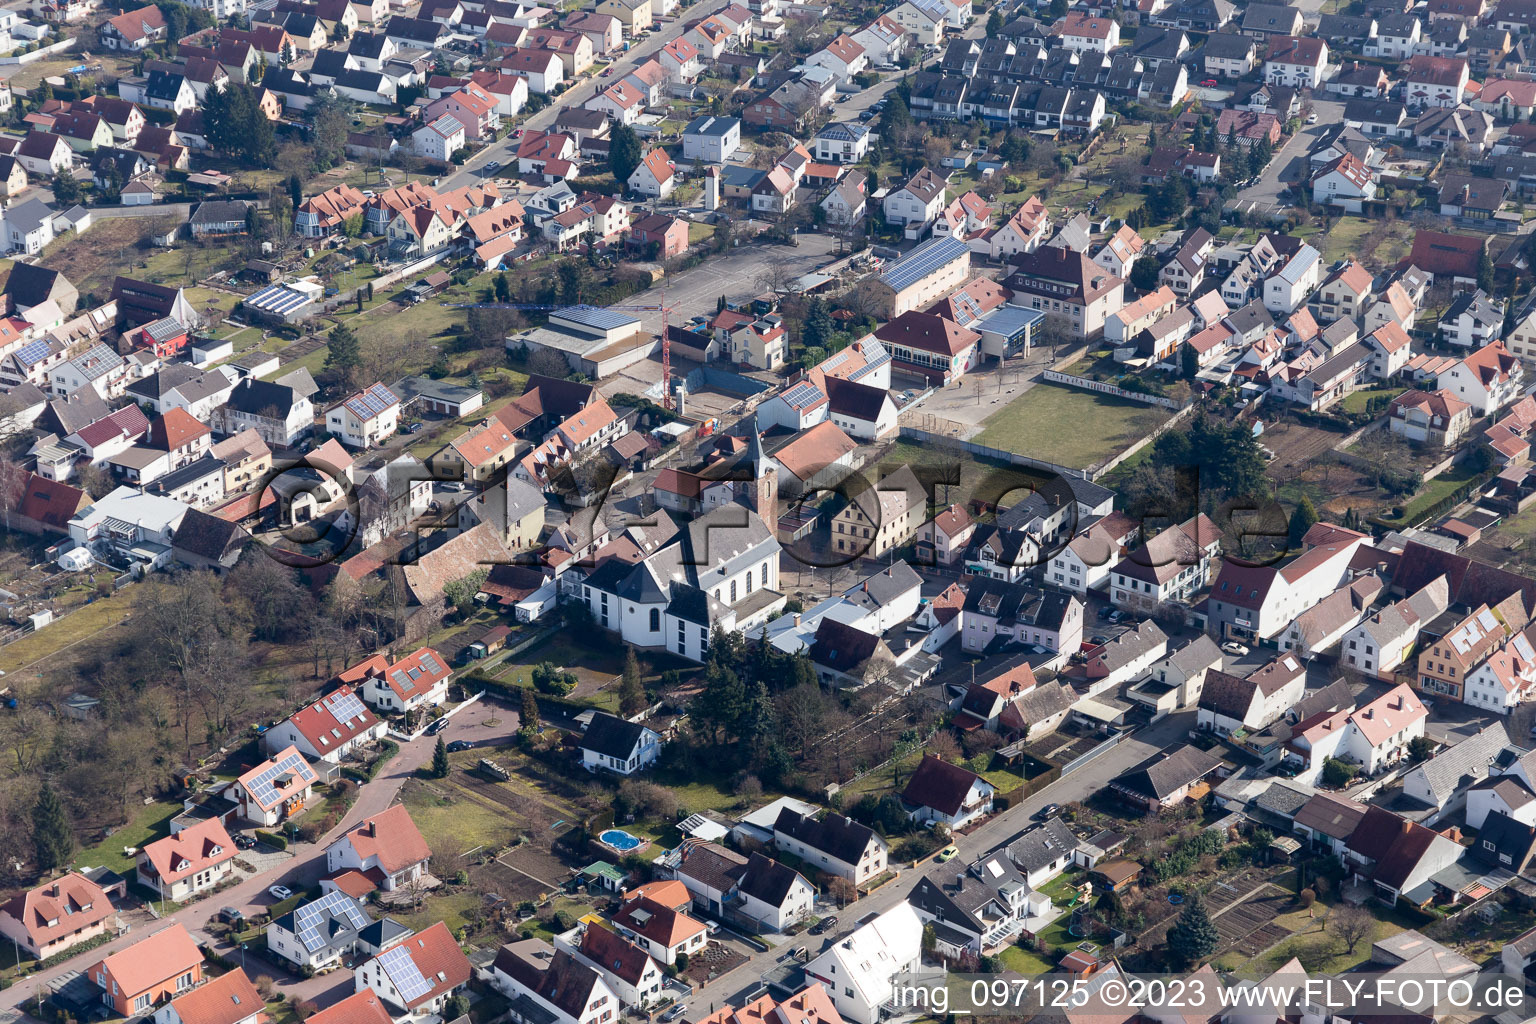 Aerial view of Catholic Church of St. Sigismund in the district Heiligenstein in Römerberg in the state Rhineland-Palatinate, Germany